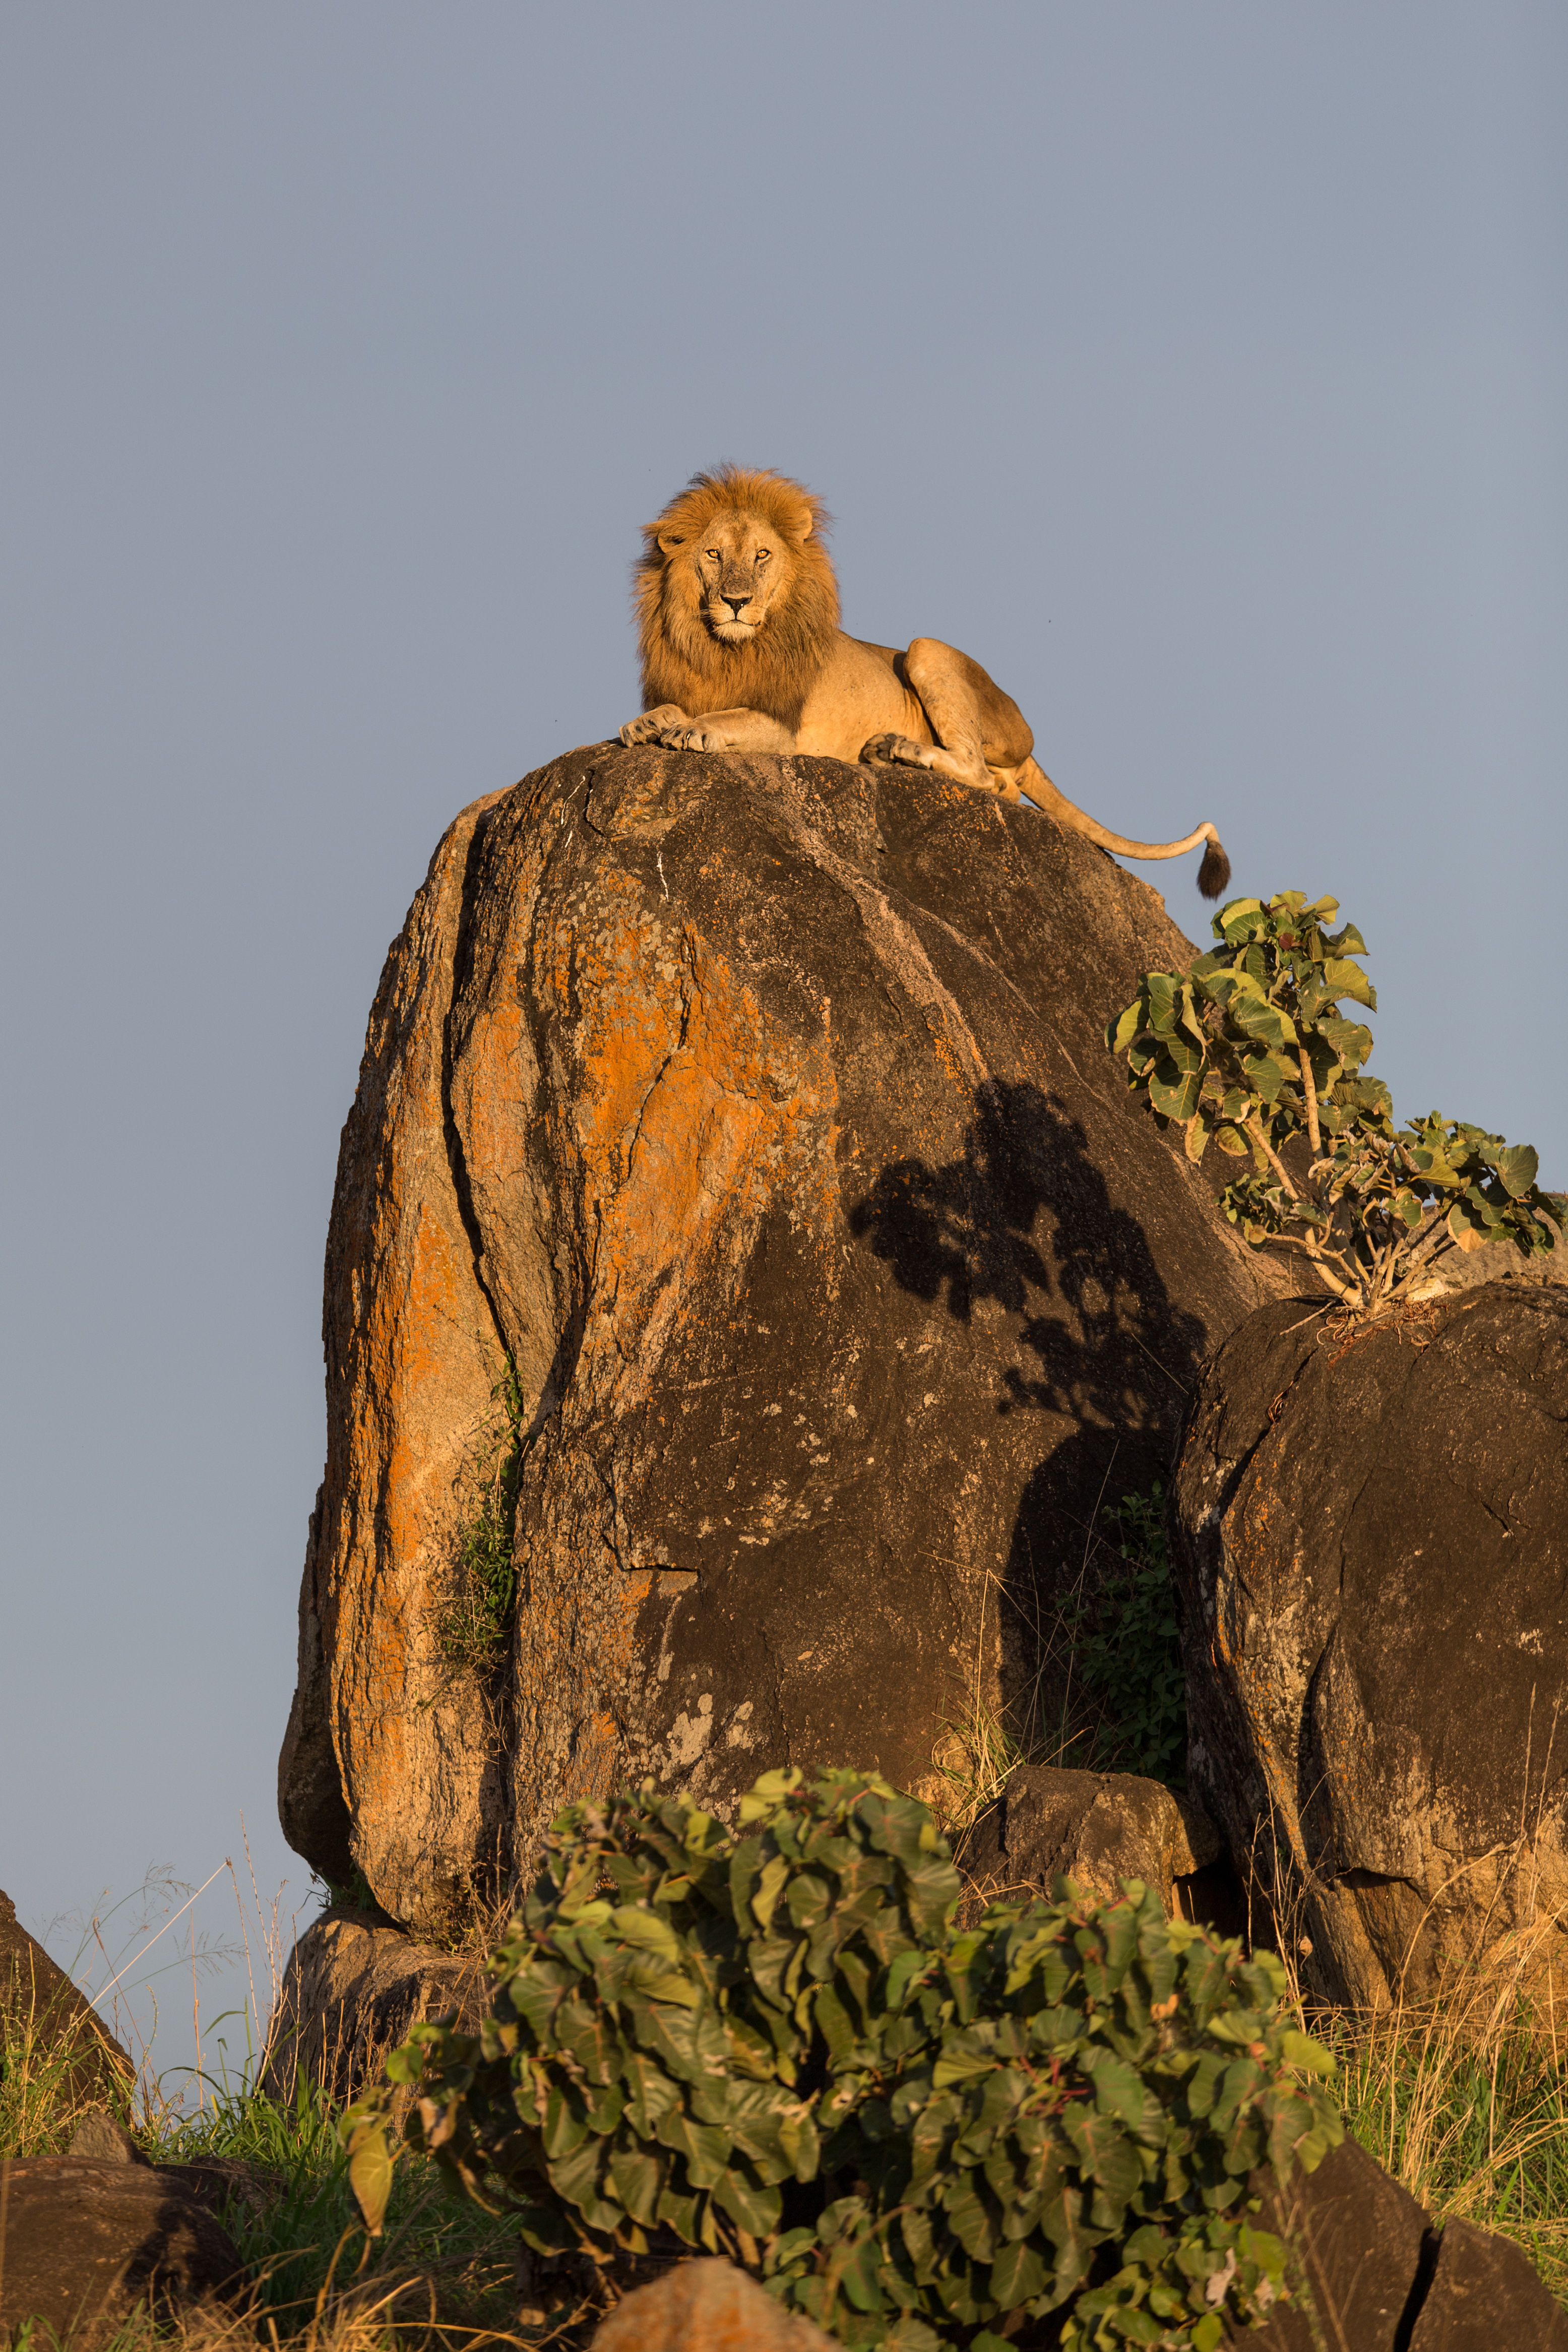 The real lion king, photographed in Uganda!